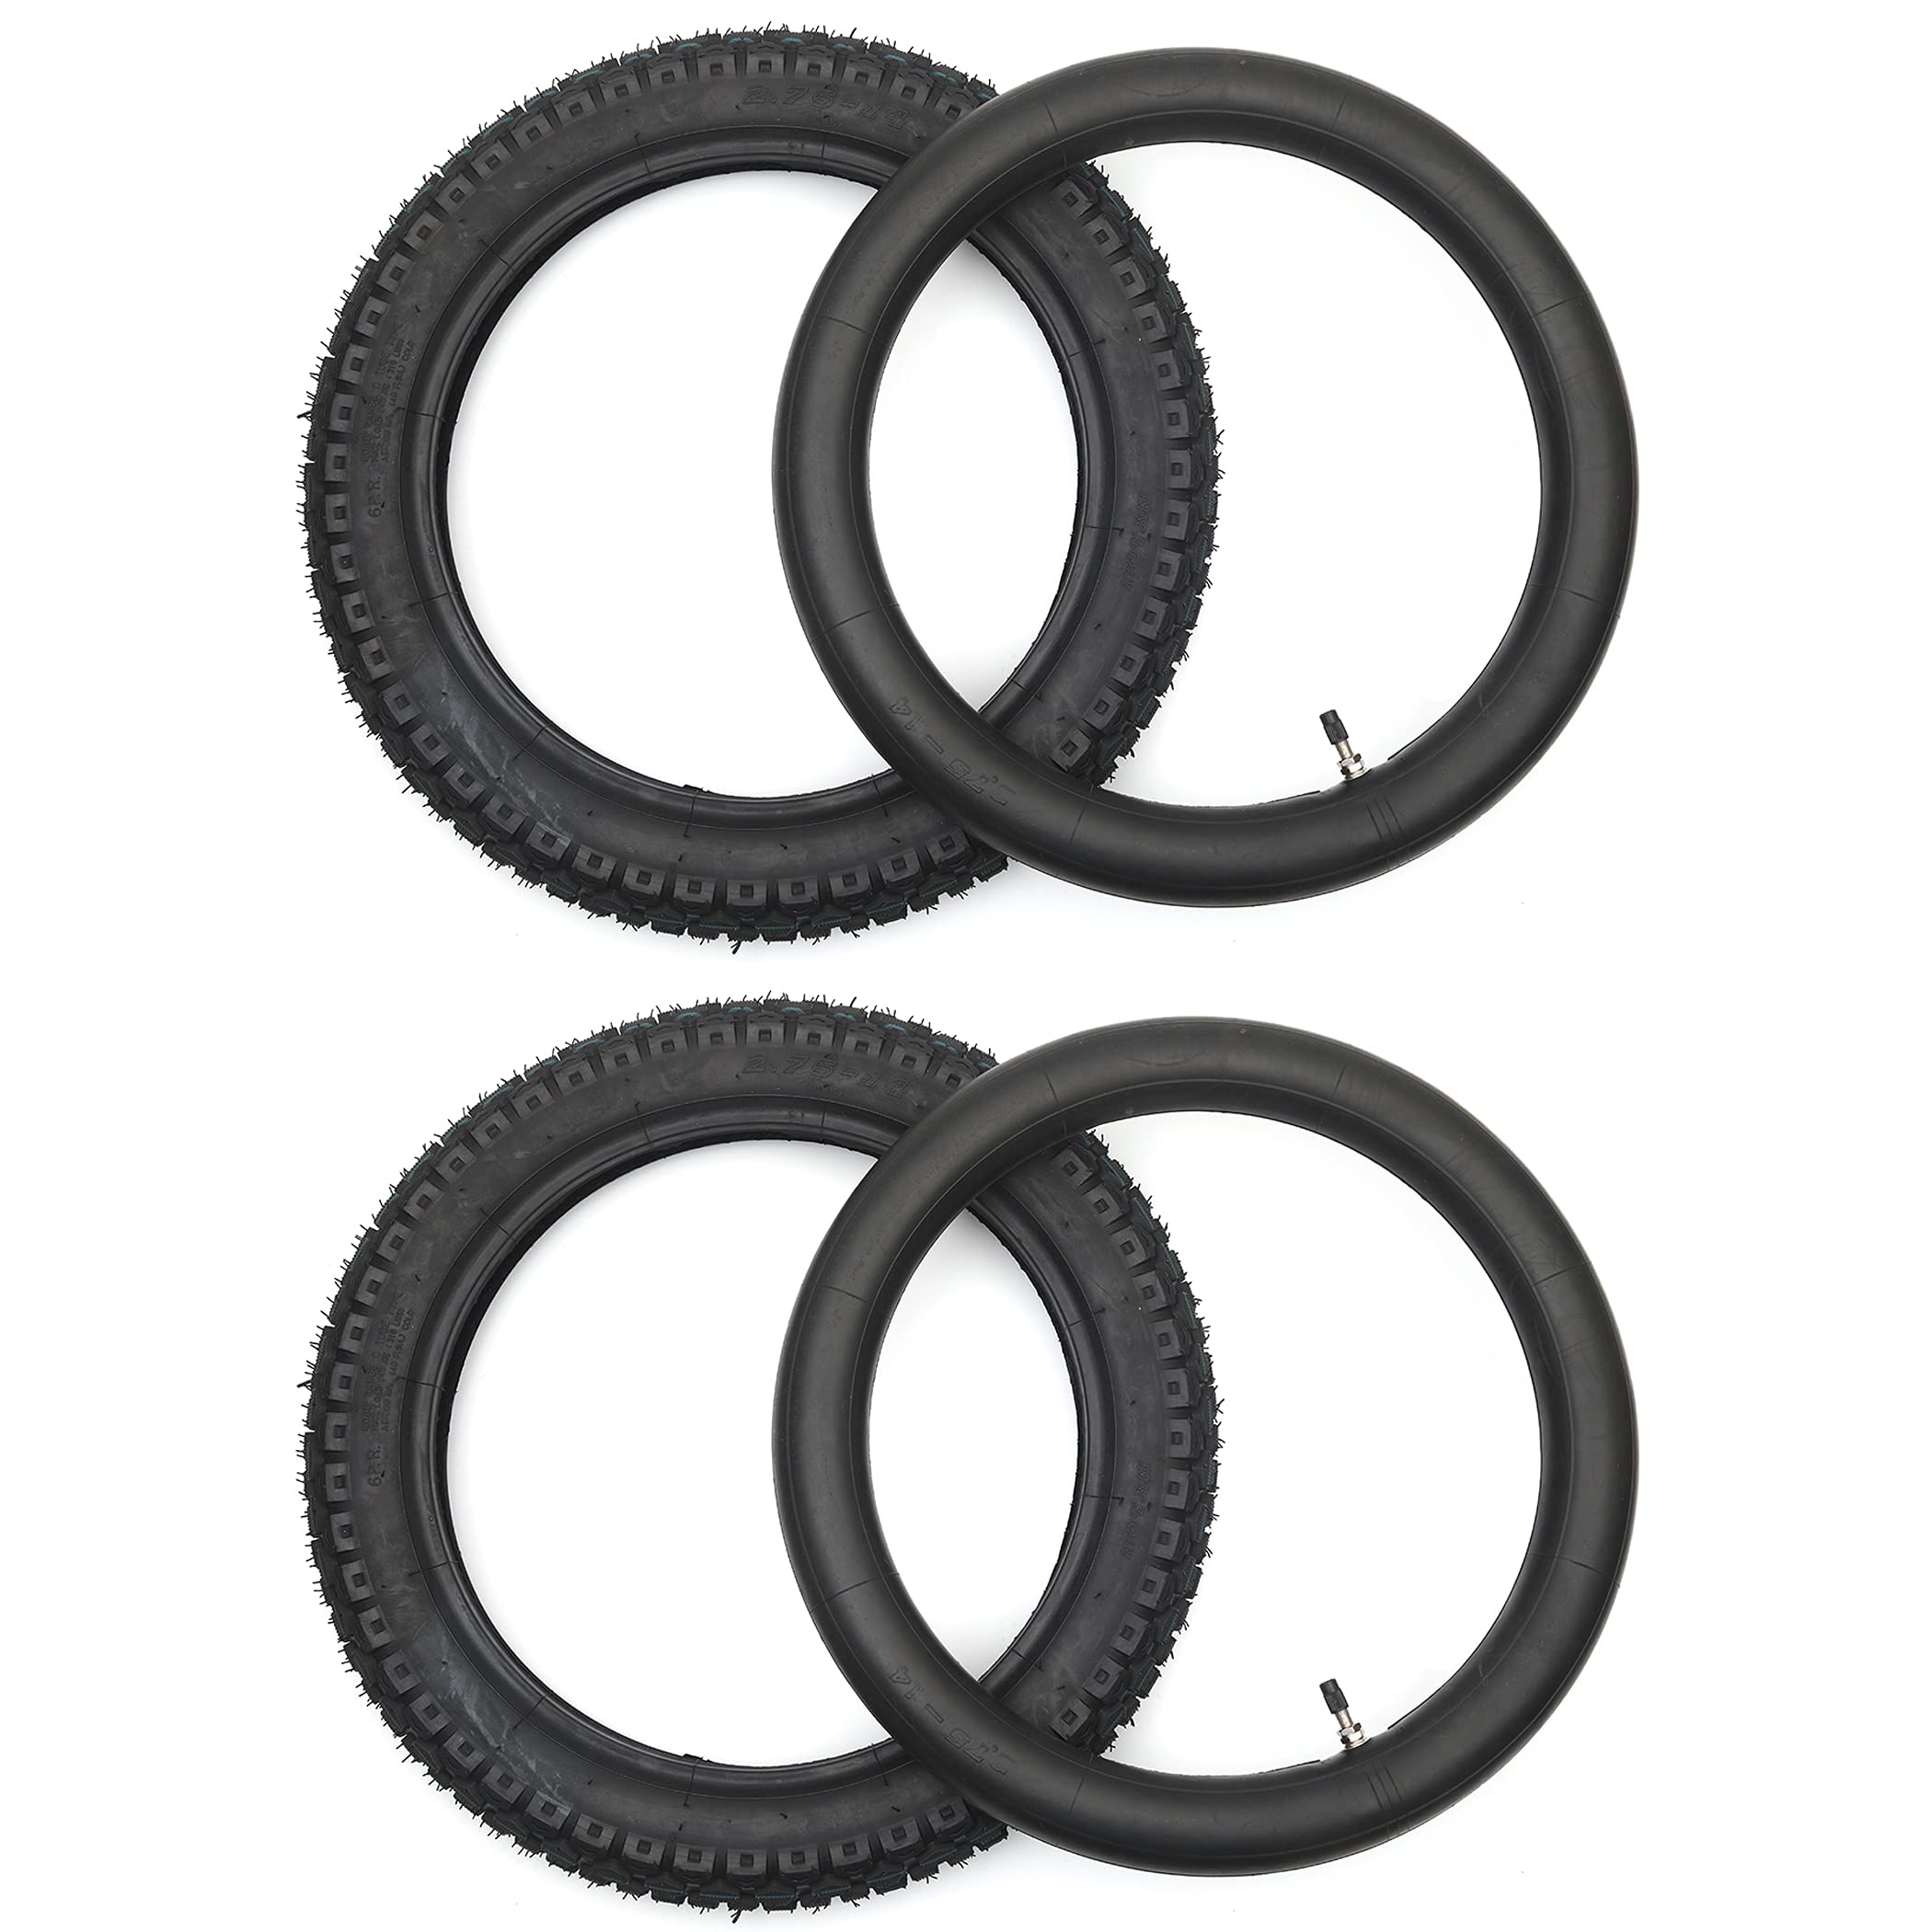 (2-Pack) 2.5/2.75-14” Replacement Dirt Bike Inner Tubes - 60/100-14” Tire Tubes for 50cc to 160cc Dirt and Pit Bikes - Compatible with Apollo RFZ, ...